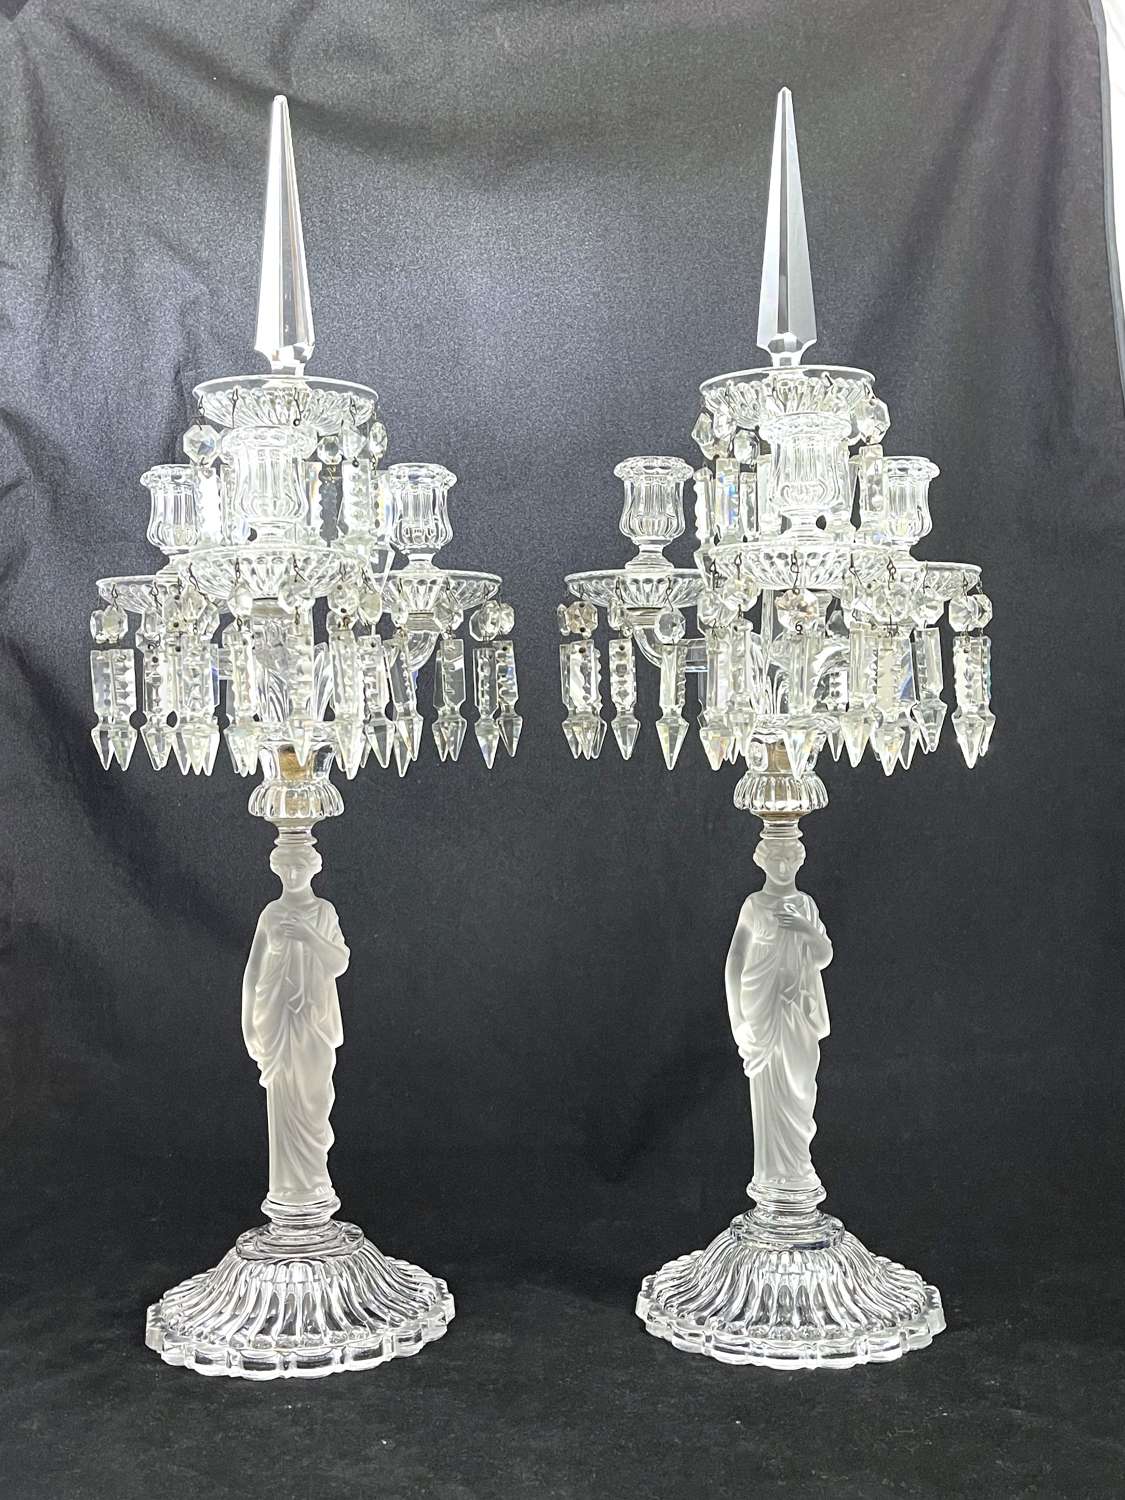 A Tall Pair of Antique BACCARAT Three Branch Candelabra